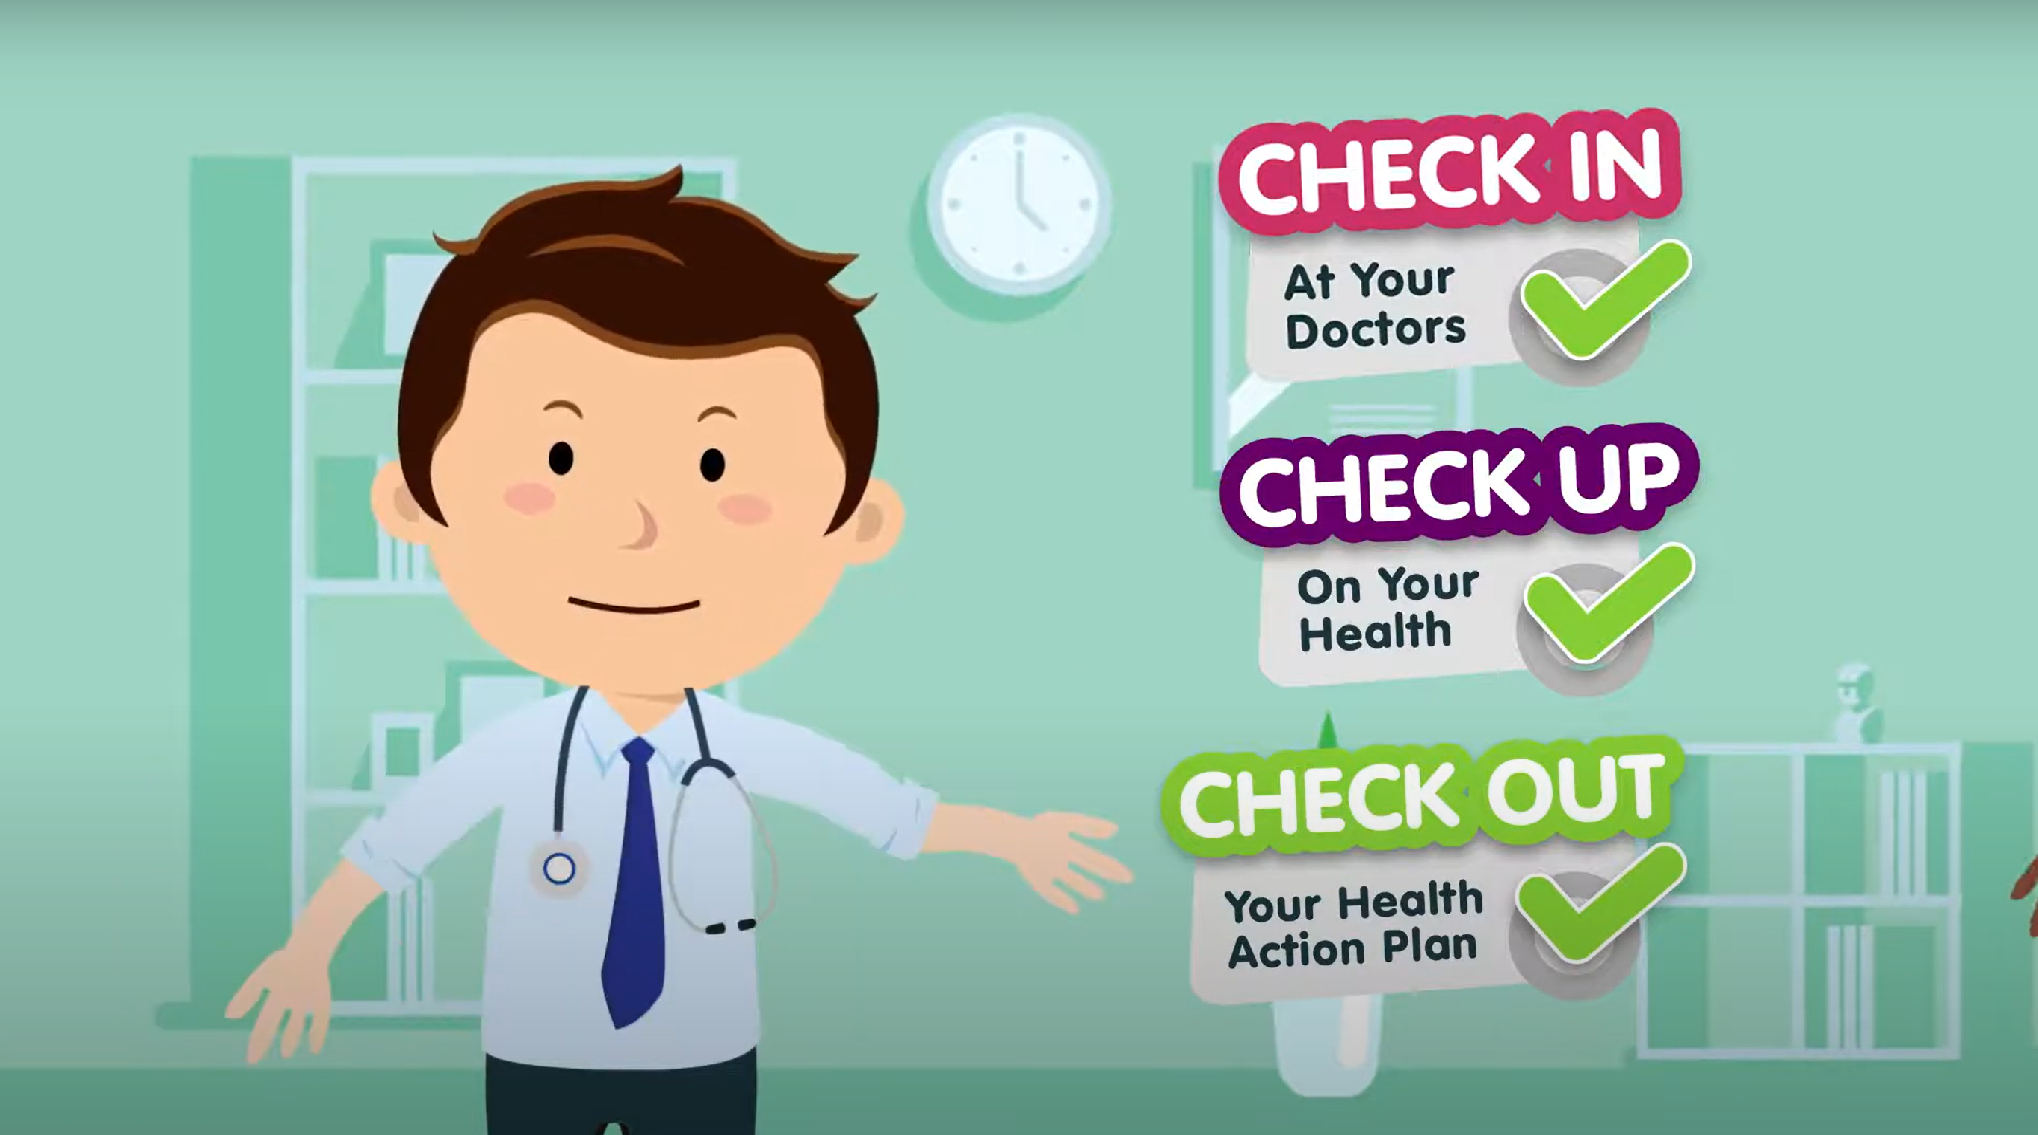 Illustration of a friendly male doctor reminding young people to Check in at your doctors, Check up on your health and Check out your Health Action Plan.